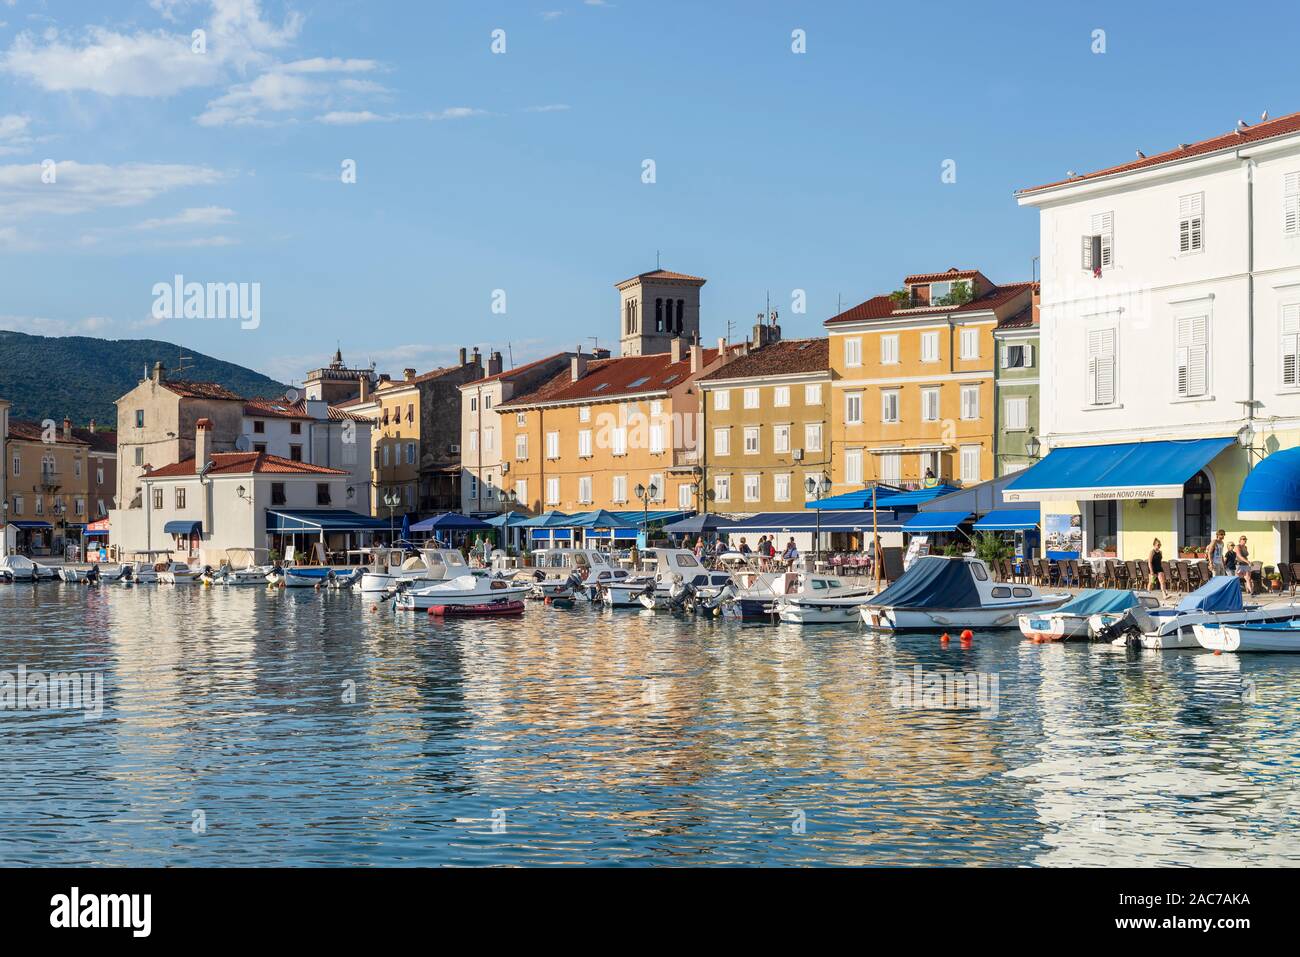 Motor boats, sailing boats and yachts in the harbor of the old town of Cres with cafes and restaurants in the evening sun, Cres, Kvarner Bay, Croatia Stock Photo